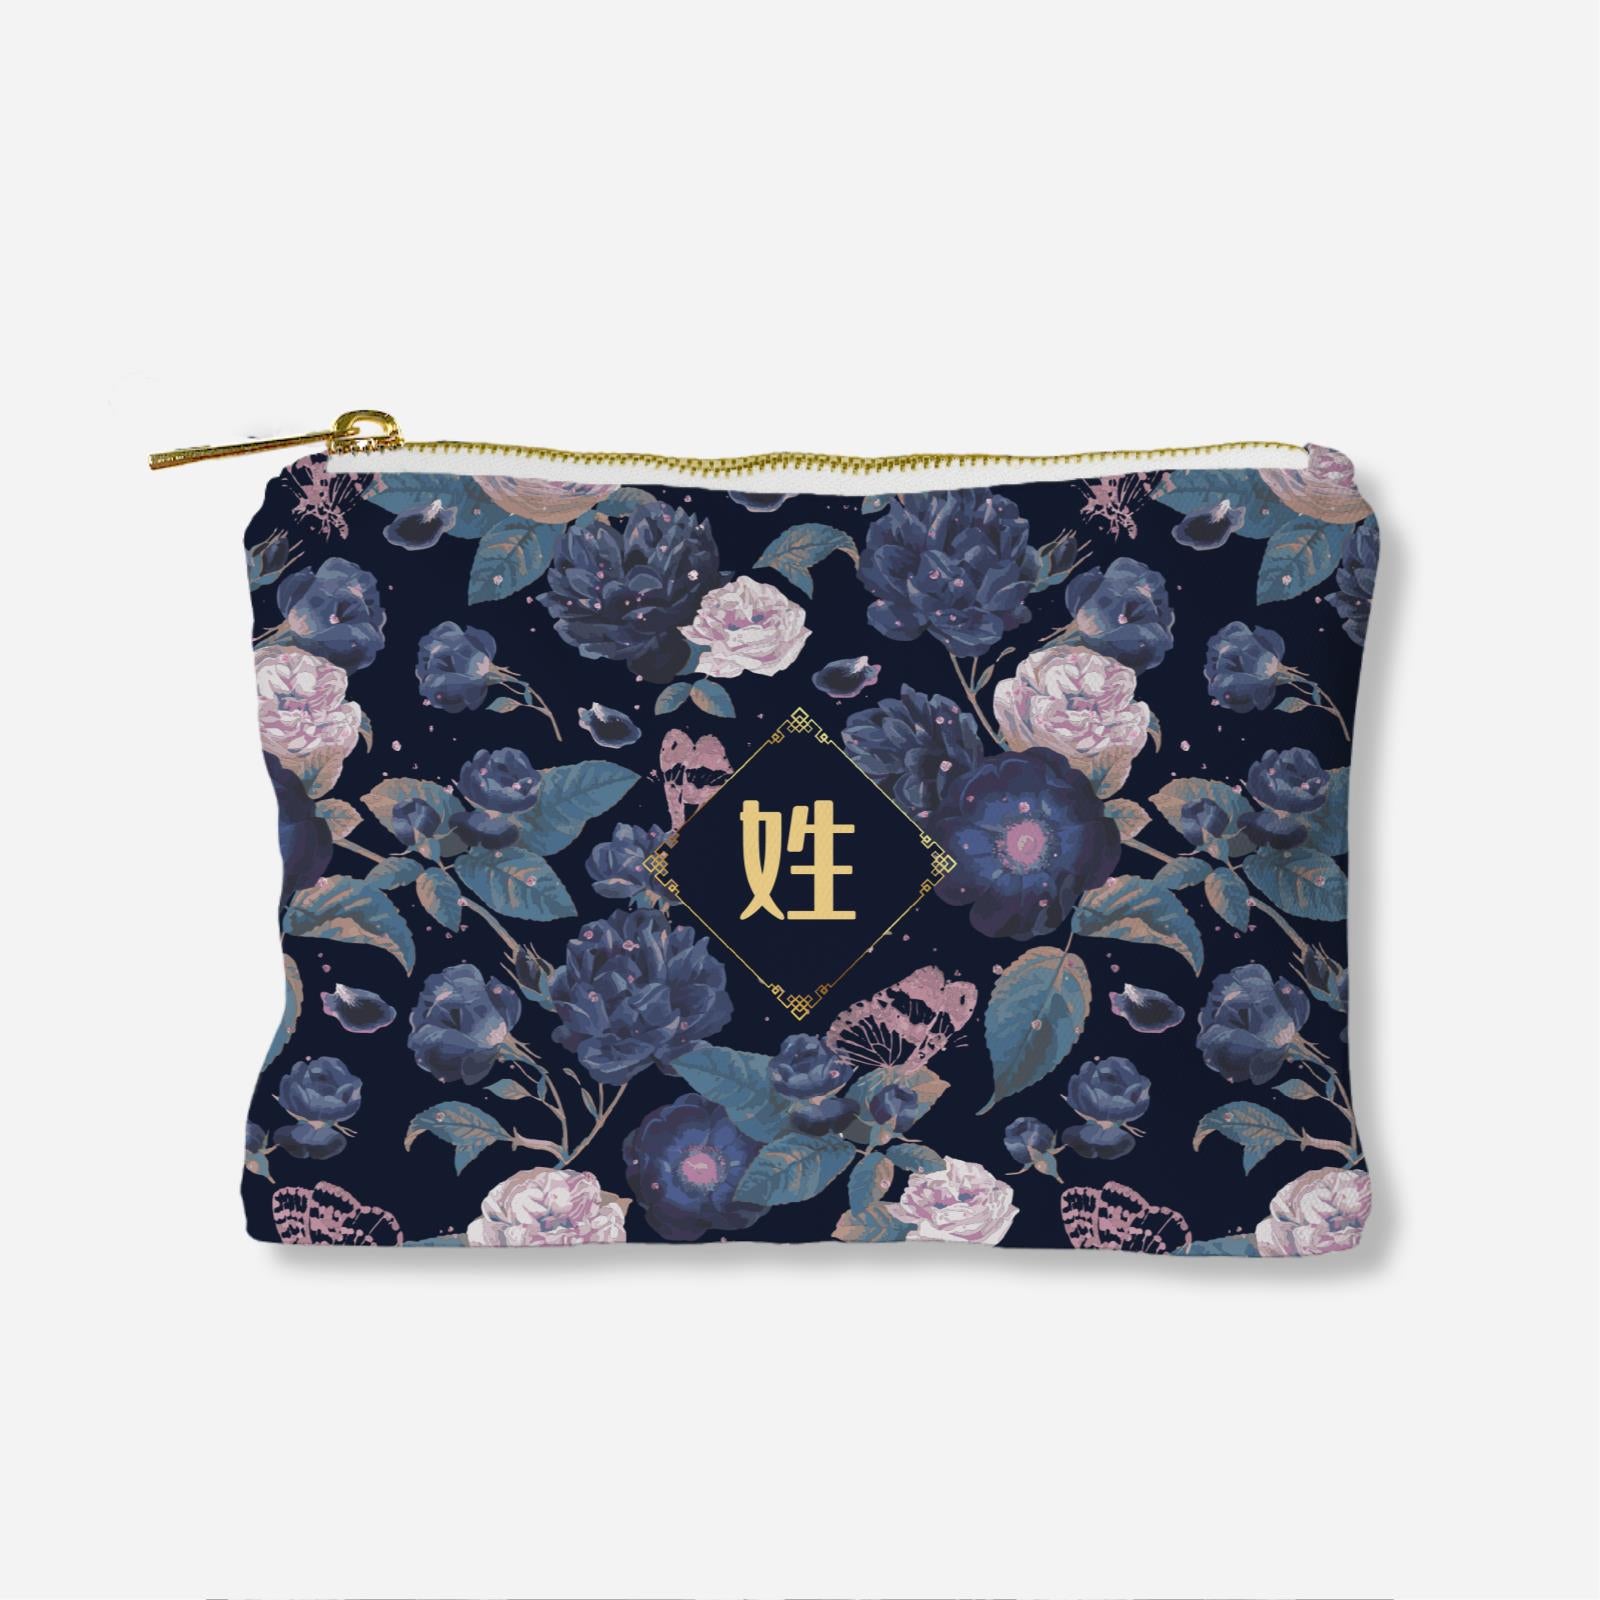 Royal Floral Series - Serene Moonlight Full Print Zipper Pouch With Chinese Personalization